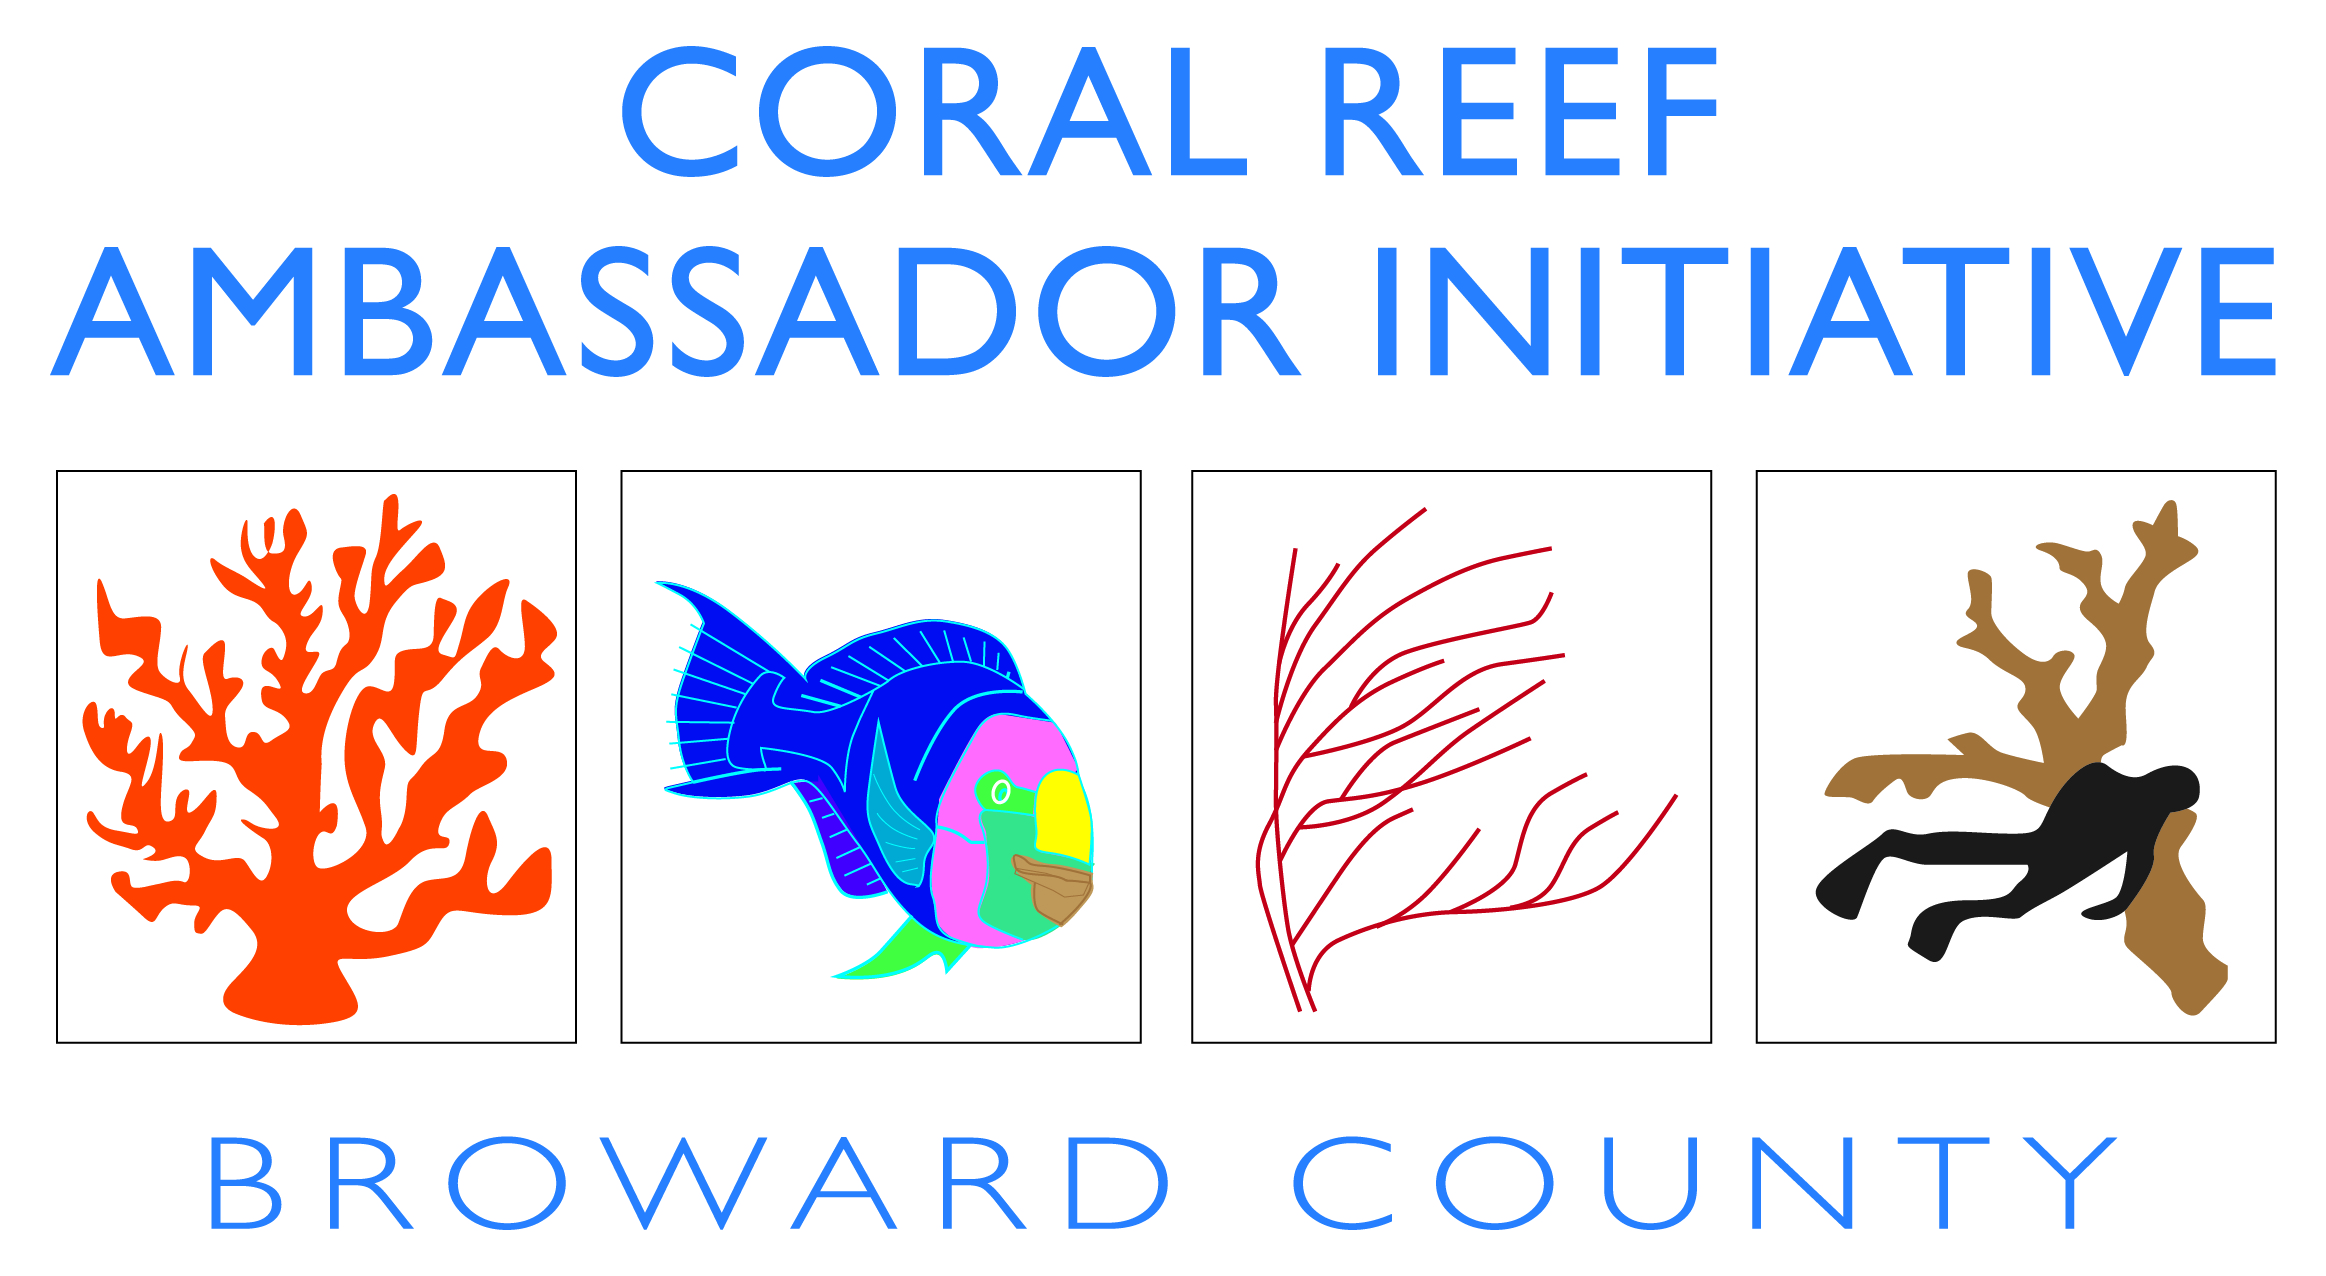 The official logo for the Coral Reef Amabassador Initiative, Broward County Florida.The official logo for the Coral Reef Amabassador Initiative, Broward County Florida.